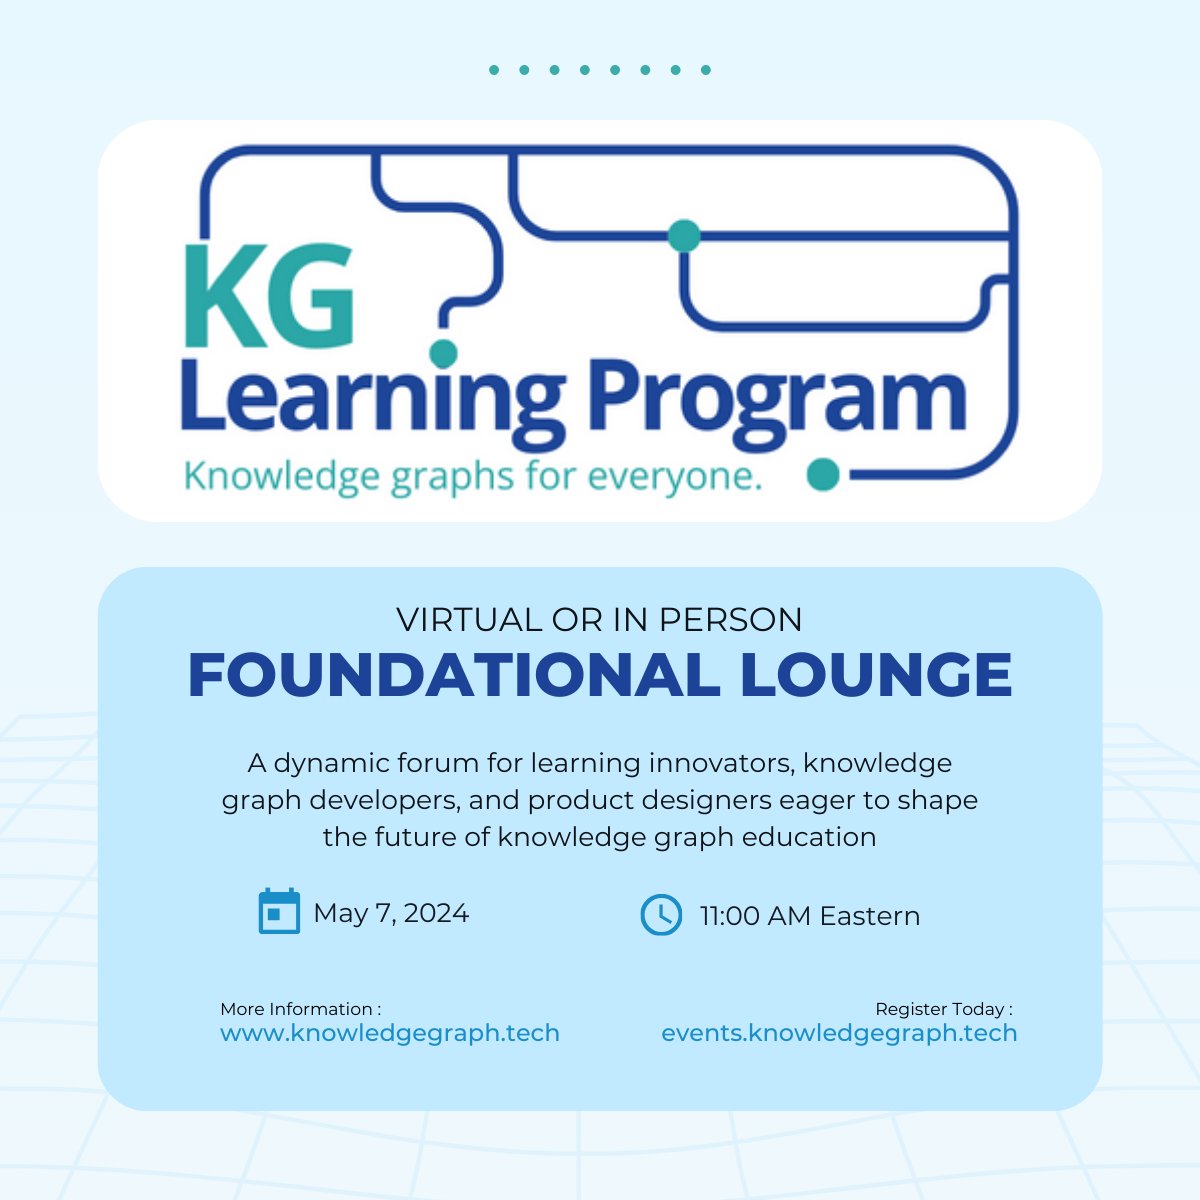 Join us May 7th in #NYC for the KG Certificate Program kickoff! Help shape the program with your input. Complete a quick pre-workshop survey by April 30th for a chance to win a virtual ticket or a free KGC digital caricature. Survey👉docs.google.com/forms/d/e/1FAI… #KGC2024 #technews